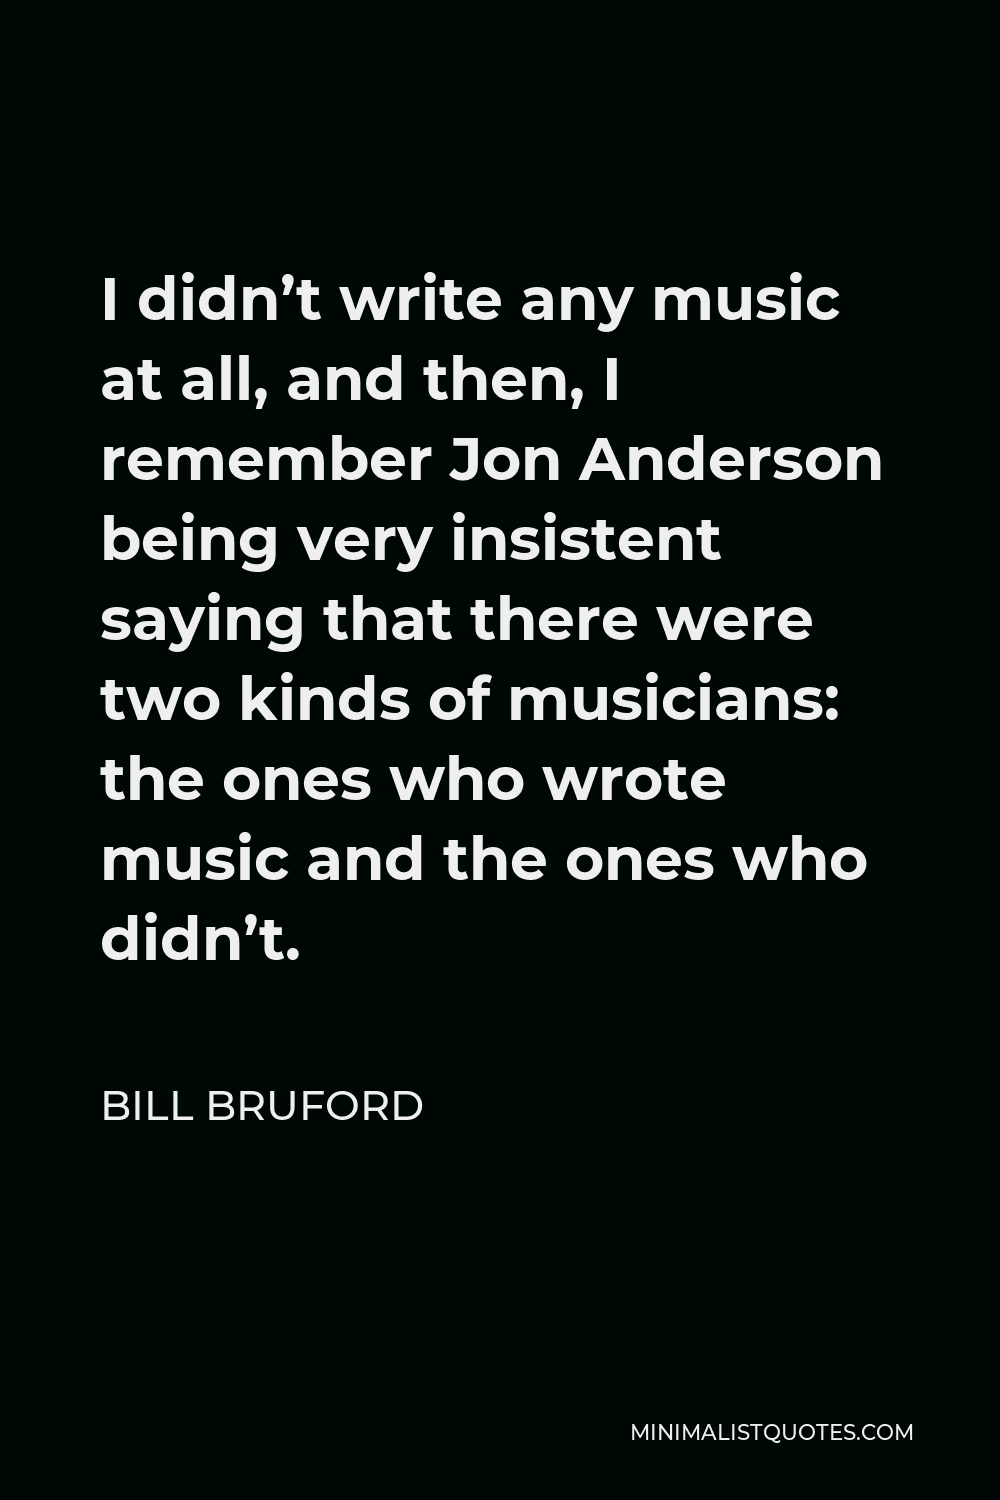 Bill Bruford Quote - I didn’t write any music at all, and then, I remember Jon Anderson being very insistent saying that there were two kinds of musicians: the ones who wrote music and the ones who didn’t.